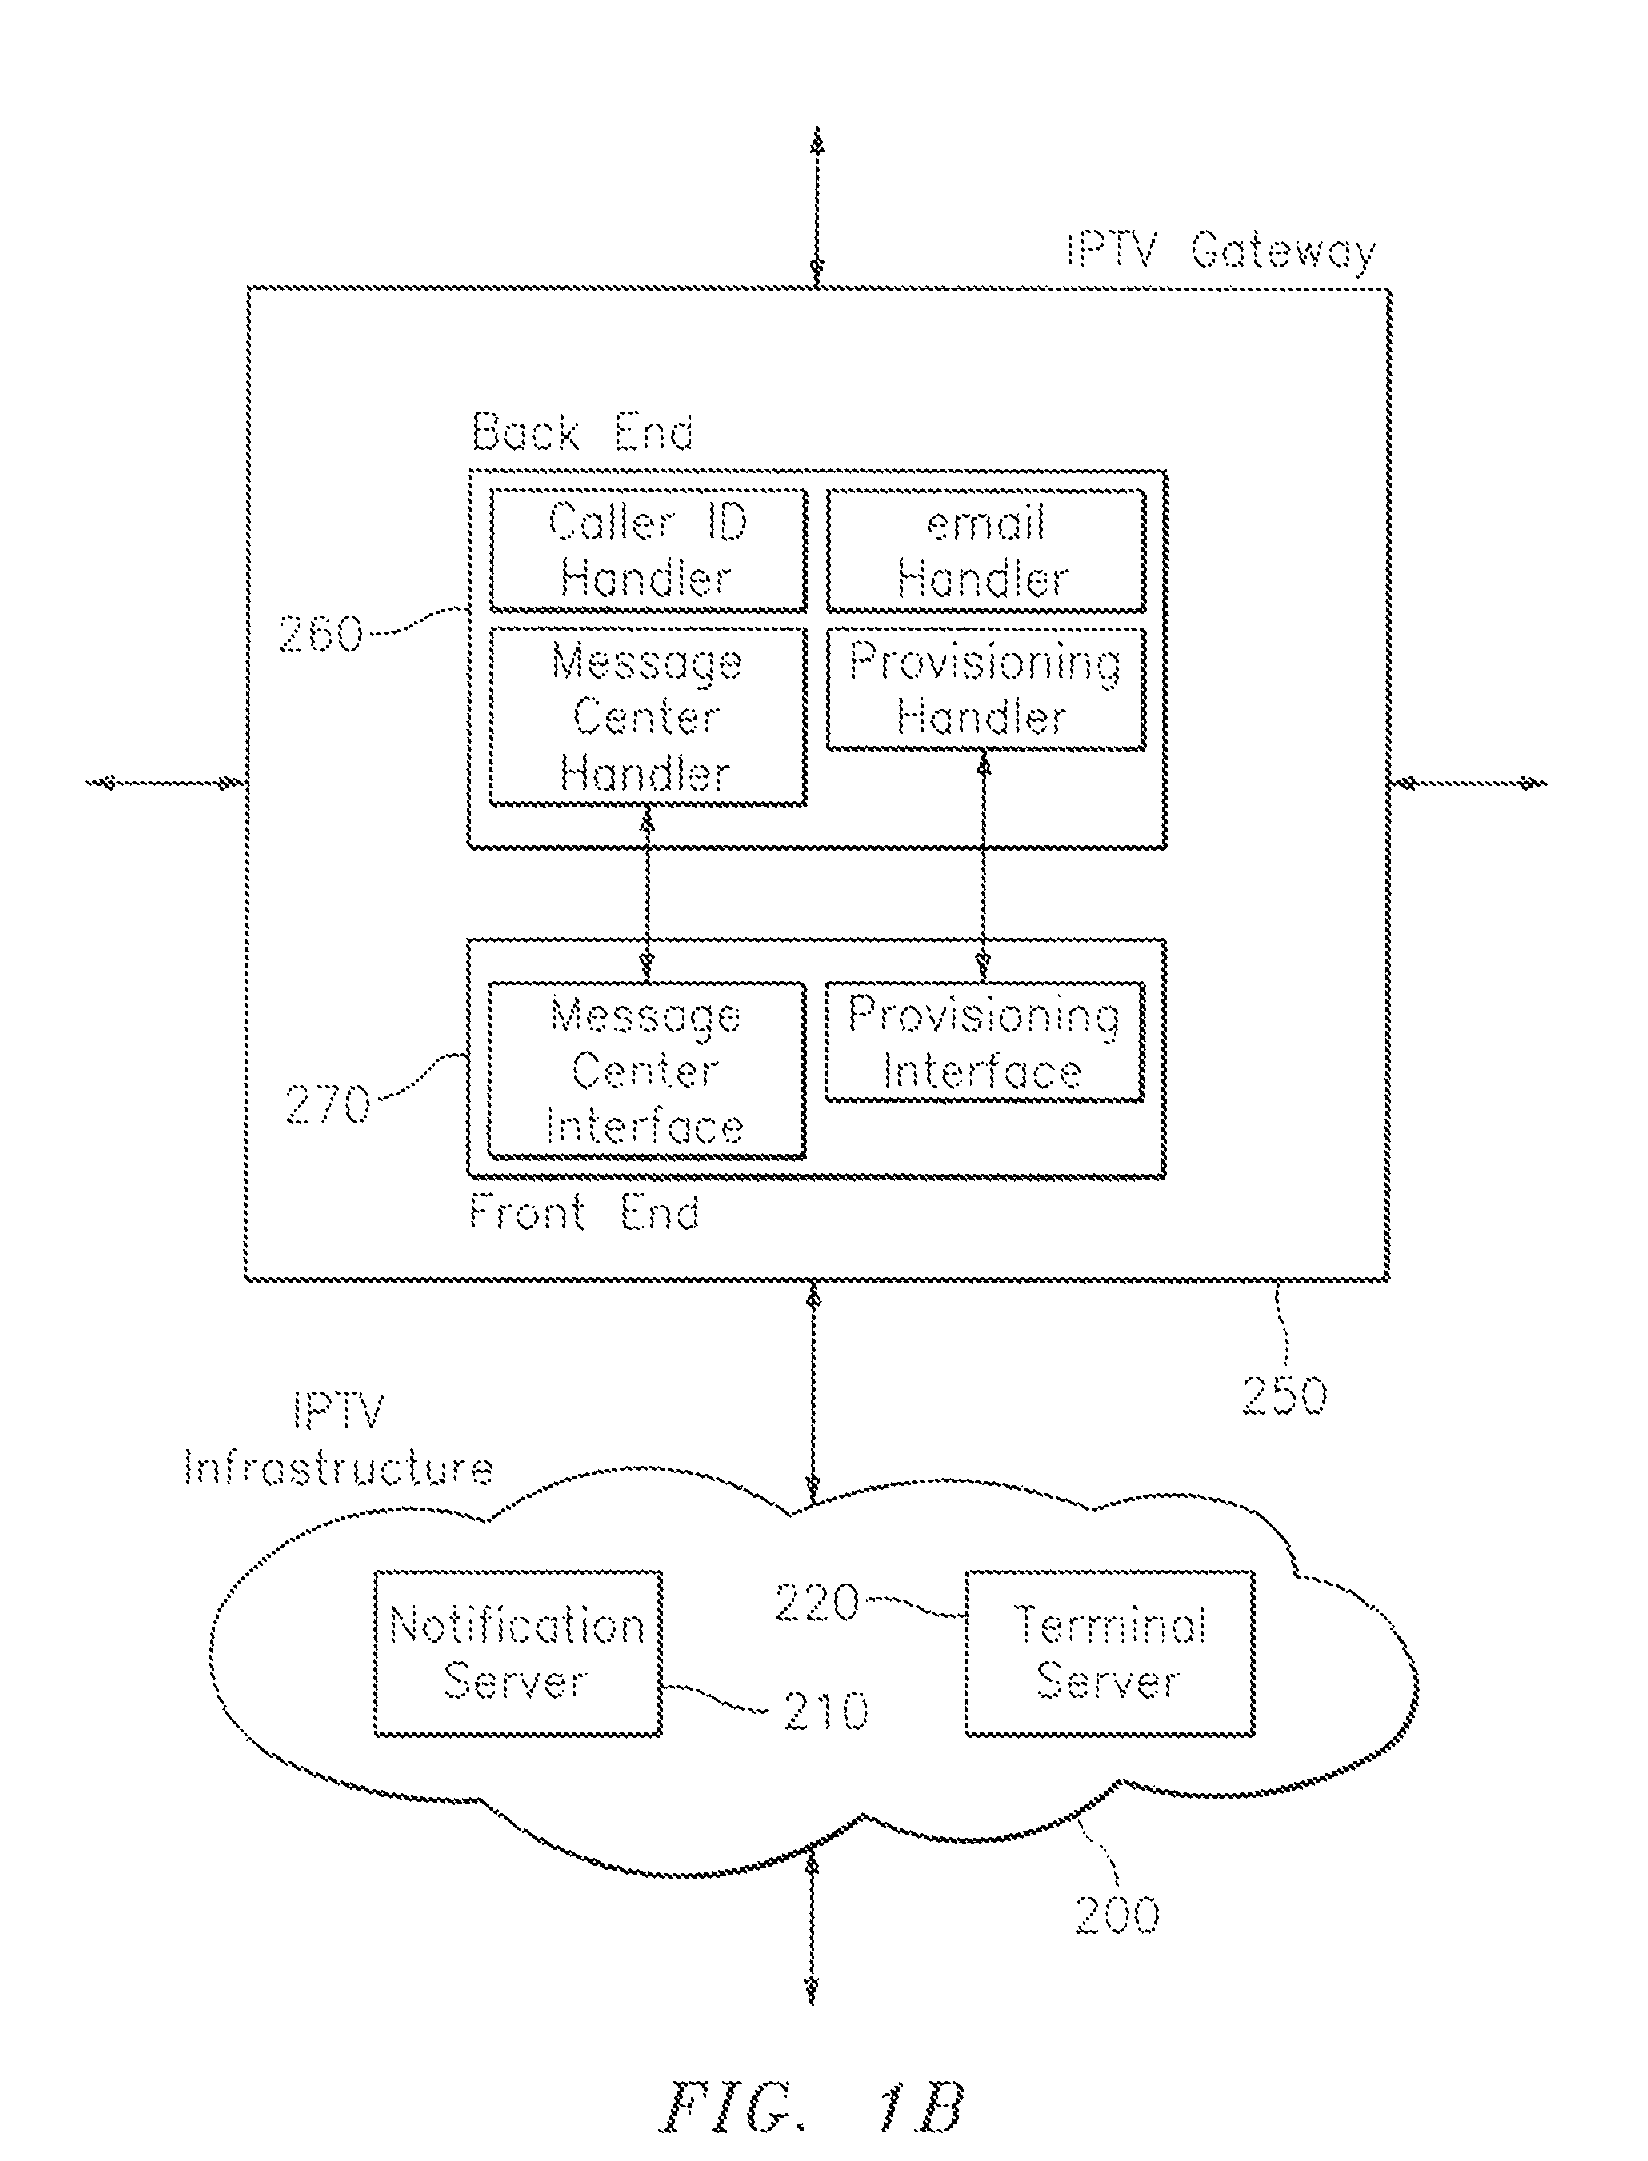 Systems, methods and computer products for caller identification from call to wireless/wireline cellular to internet protocol television